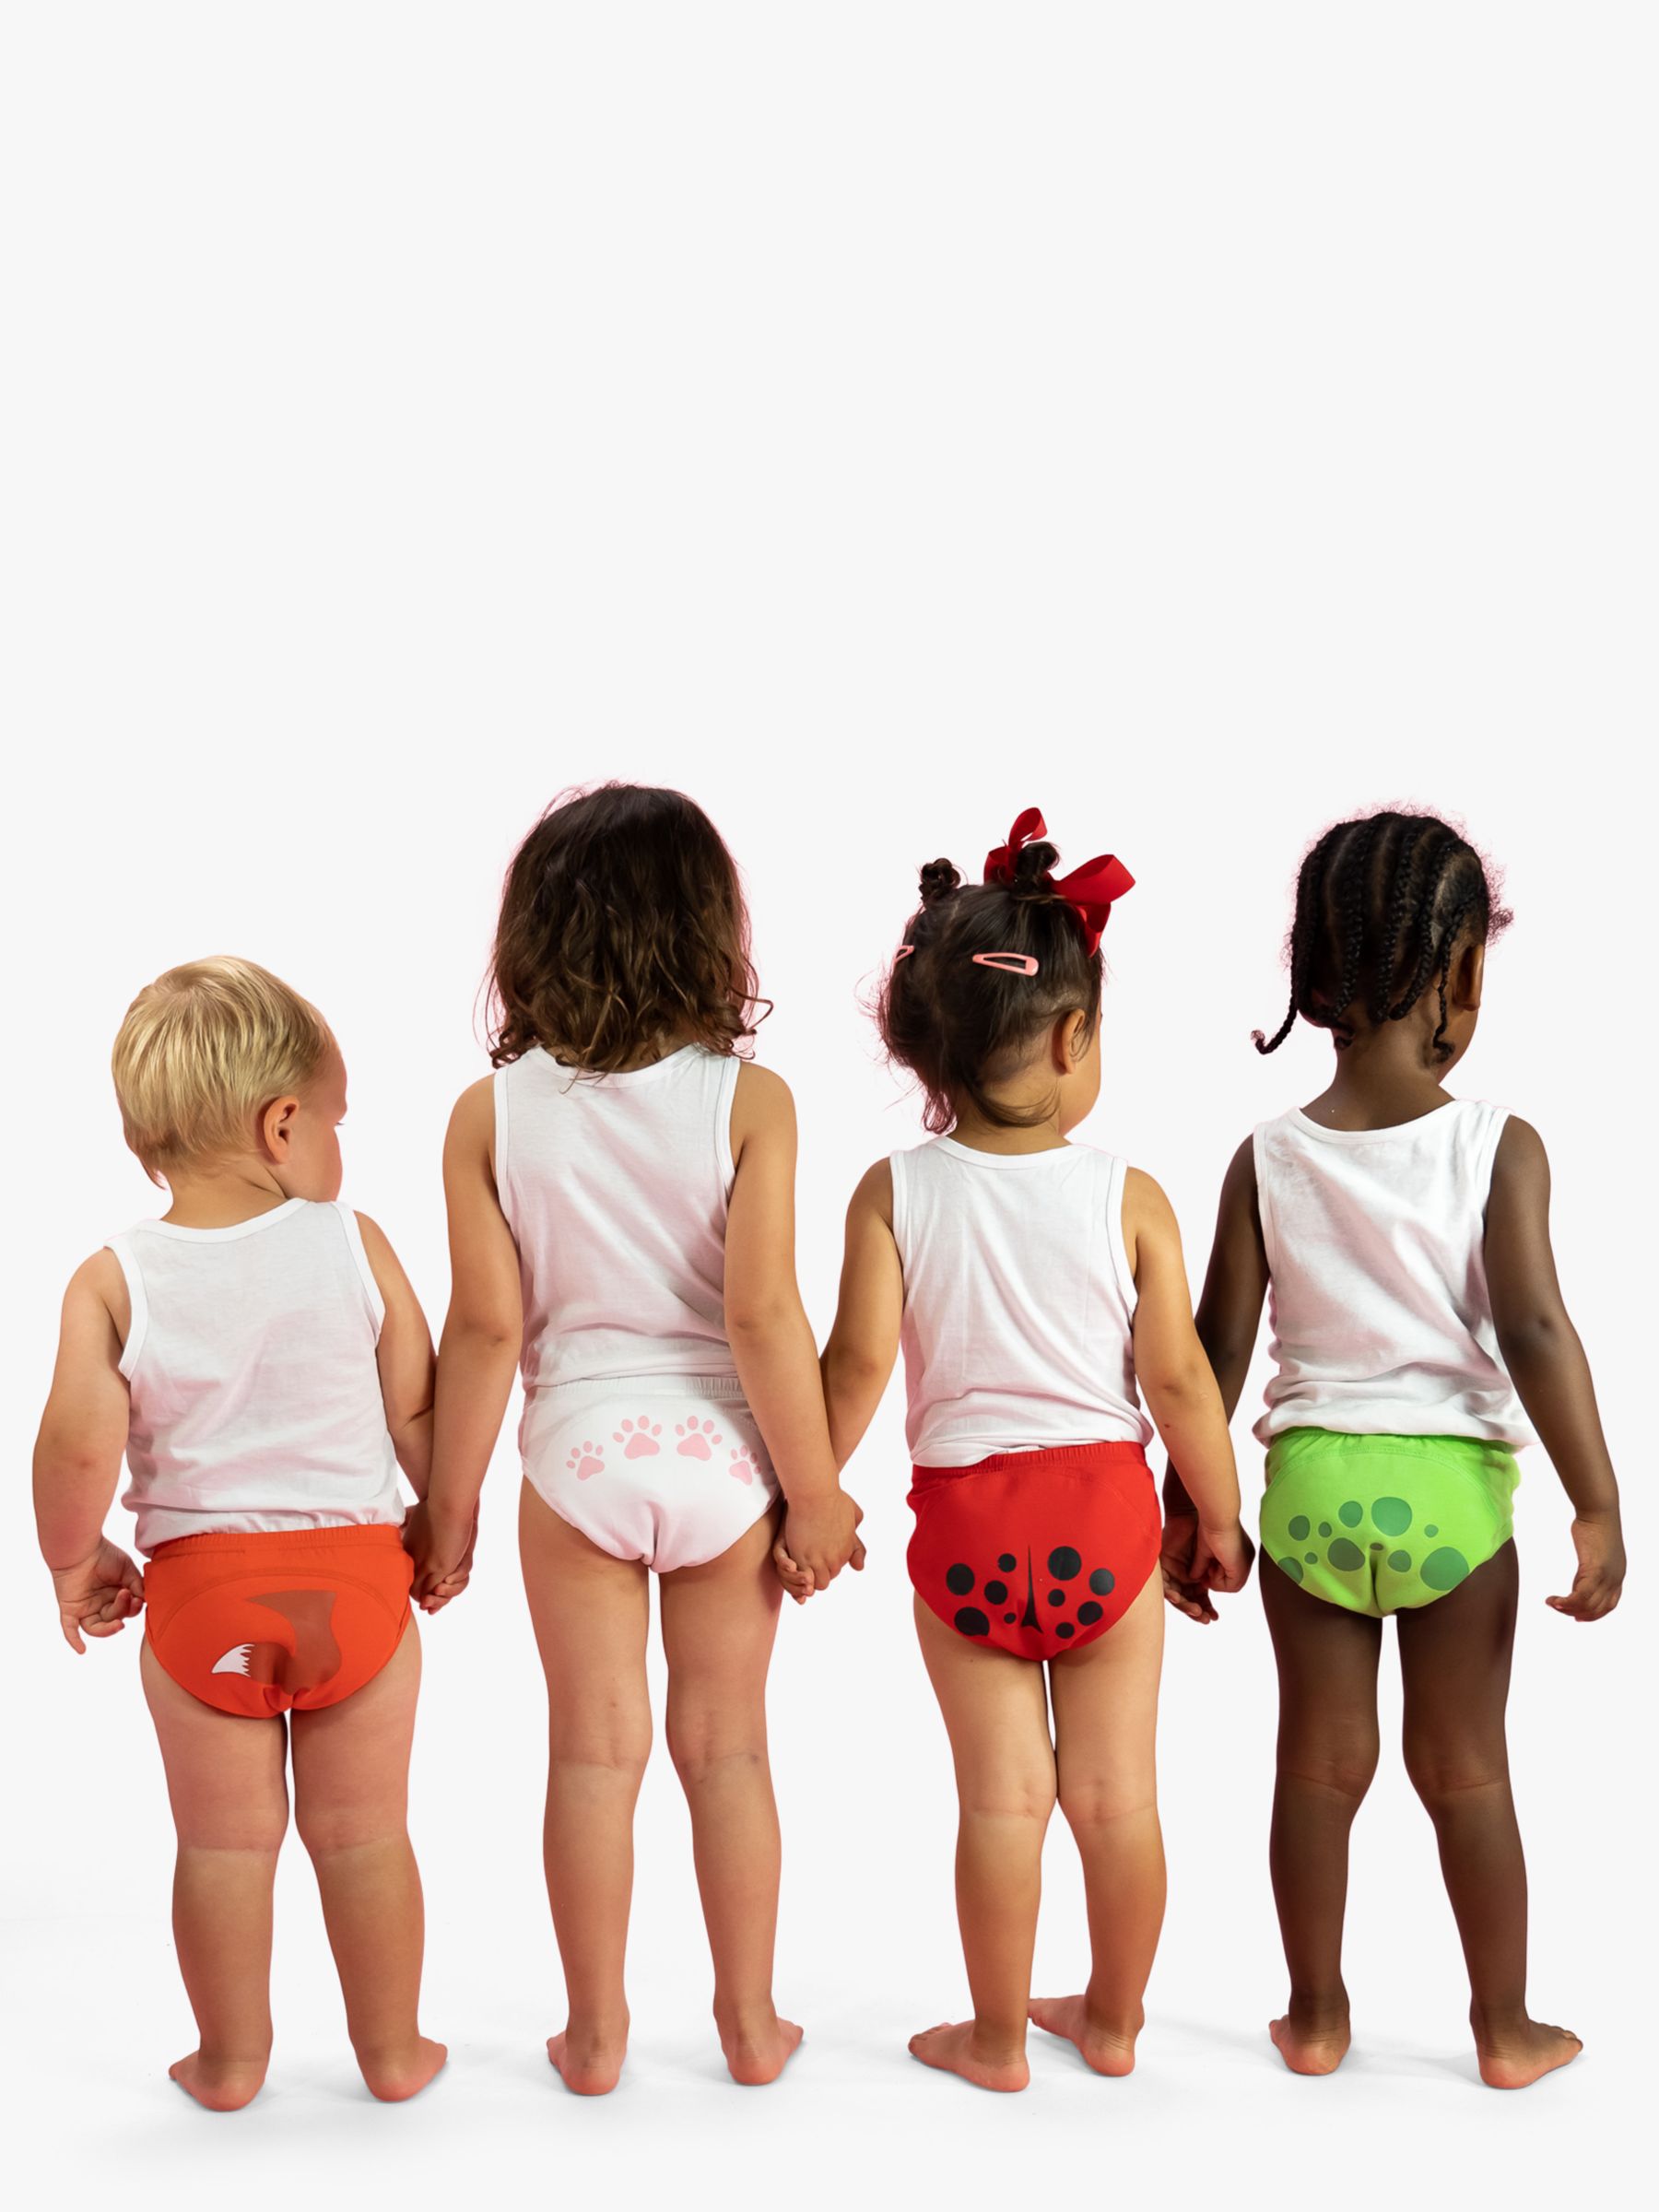 My Carry Potty Training Pants, Pack of 3